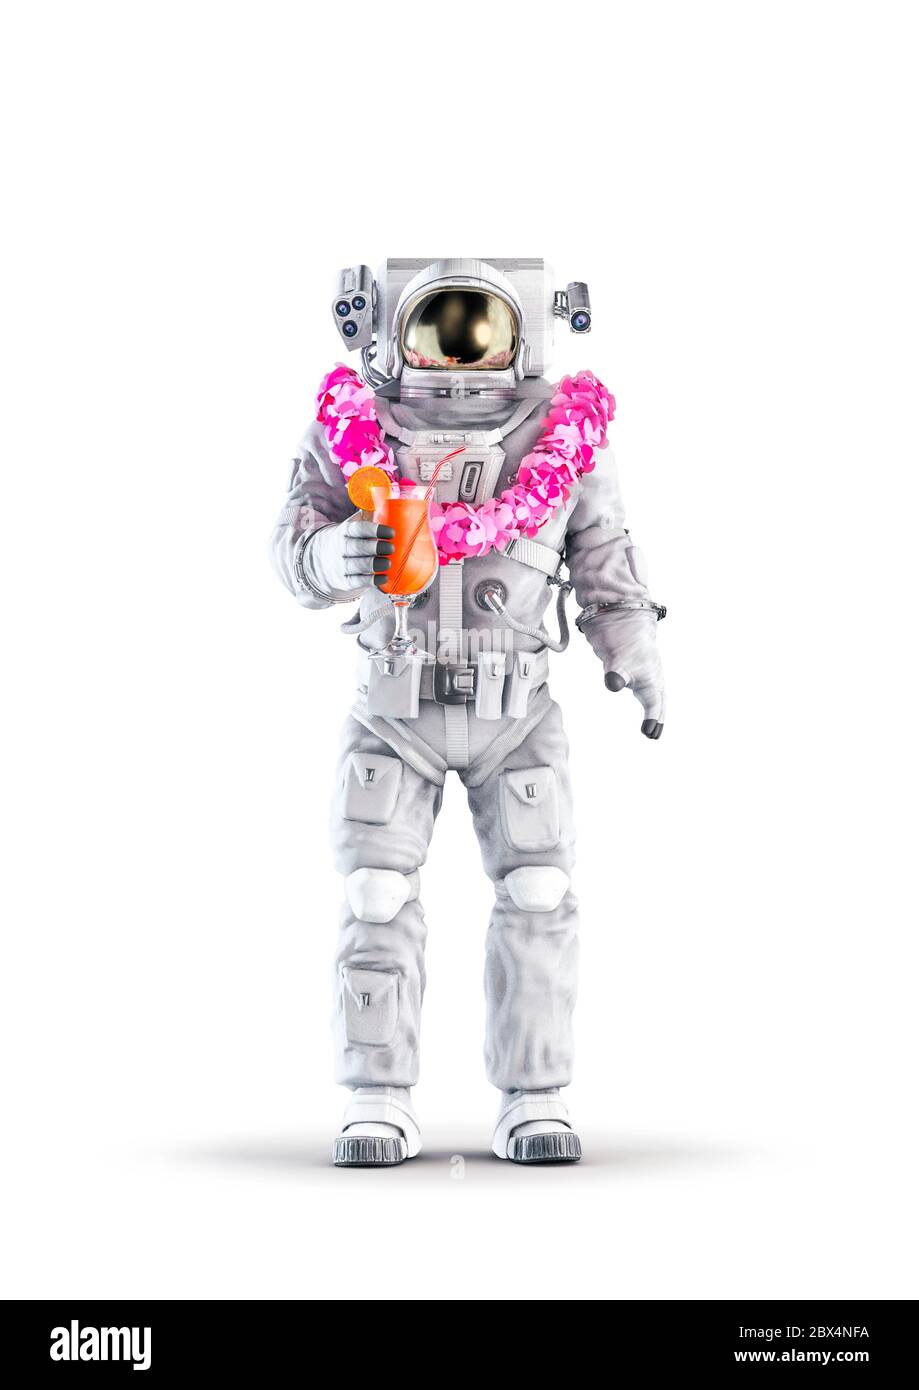 Tropical holiday astronaut / 3D illustration of space suit wearing male figure on vacation with fruit cocktail and Hawaiian flower lei isolated on whi Stock Photo